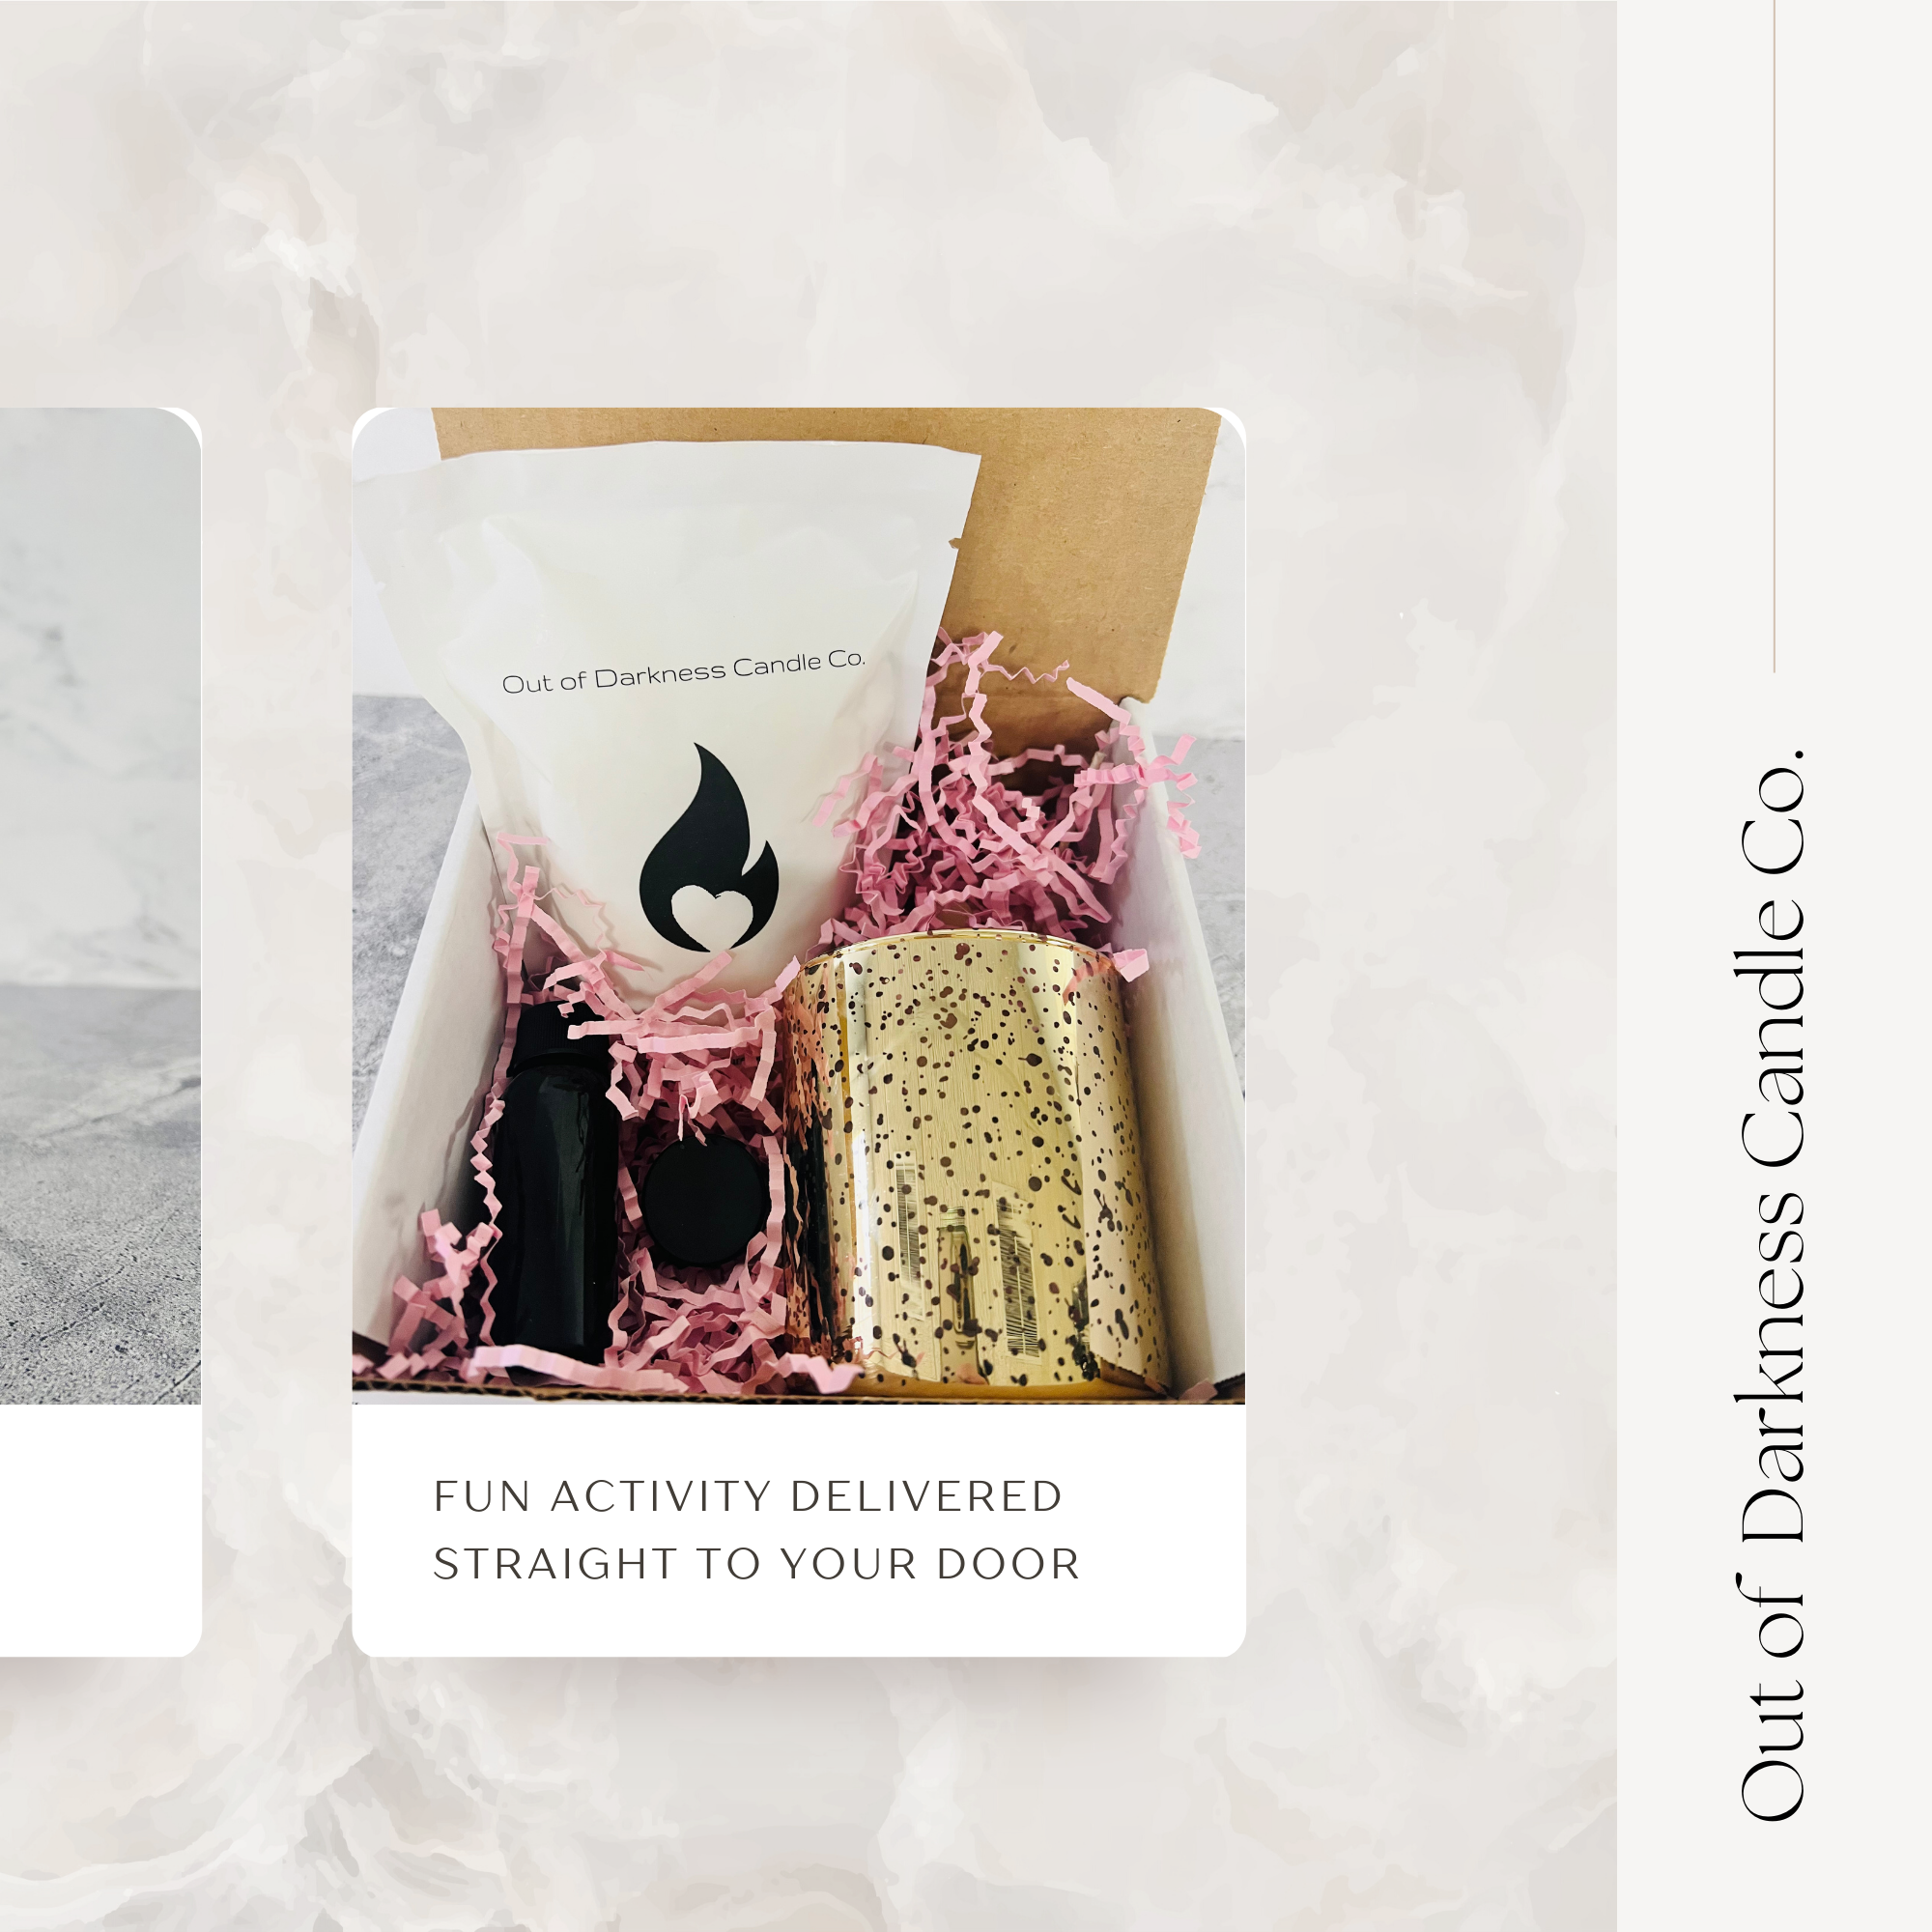 gold metallic candle vessel, black bottle, white bag of wax in a box surrounded by pink crinkle cut paper says fun activity delivered straight to your door